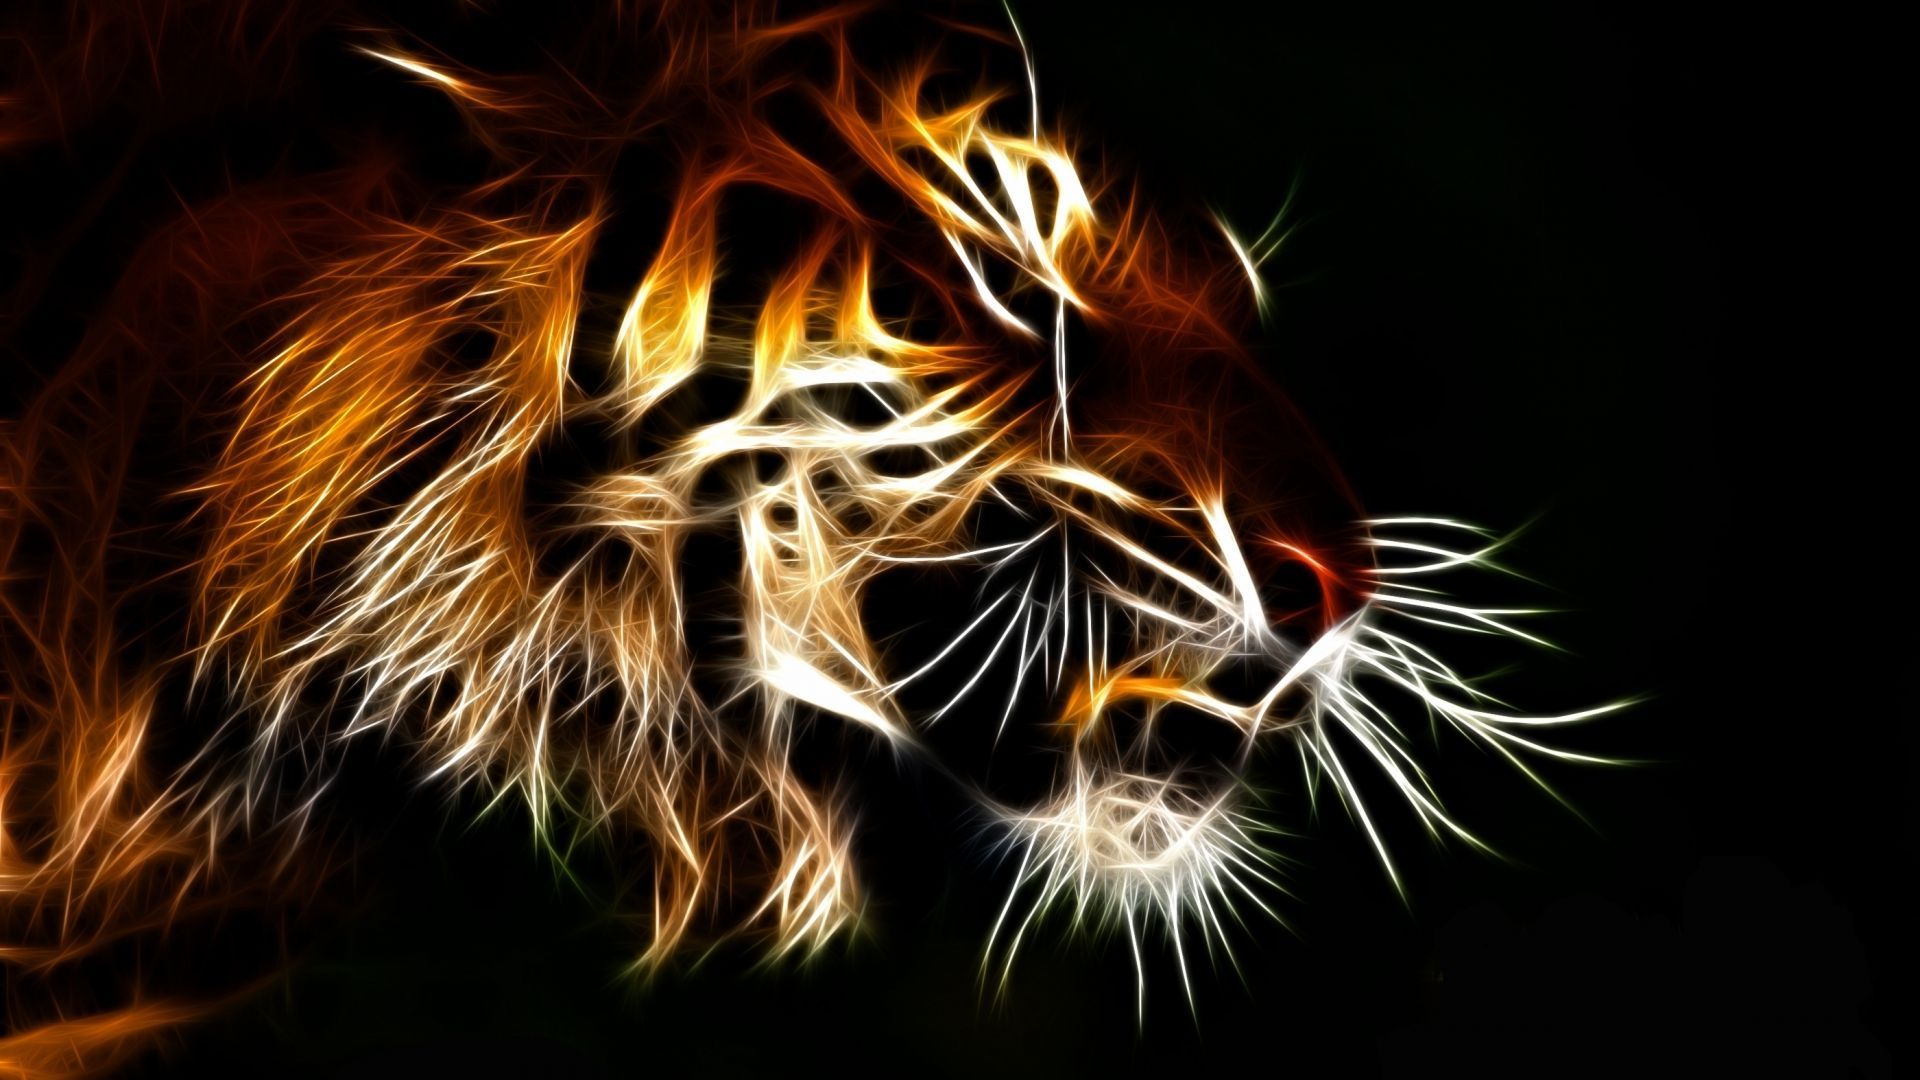 Translucent tiger abstract hd wallpaper Free hd wallpapers for